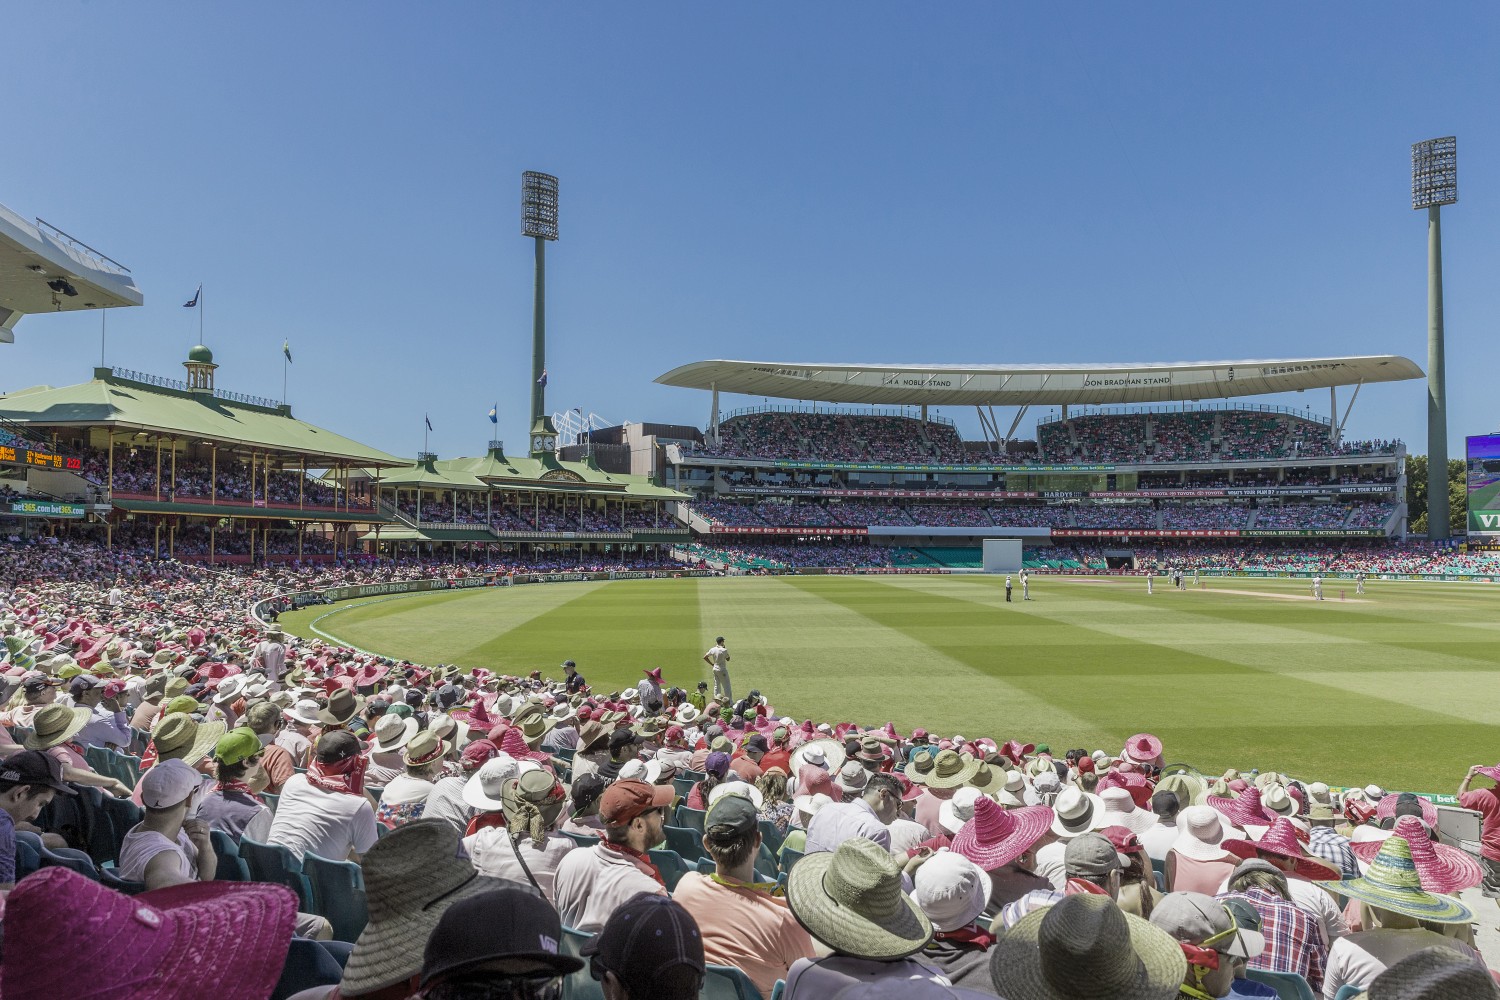 Sydney A city that will take every cricket lover's breath away 100MB